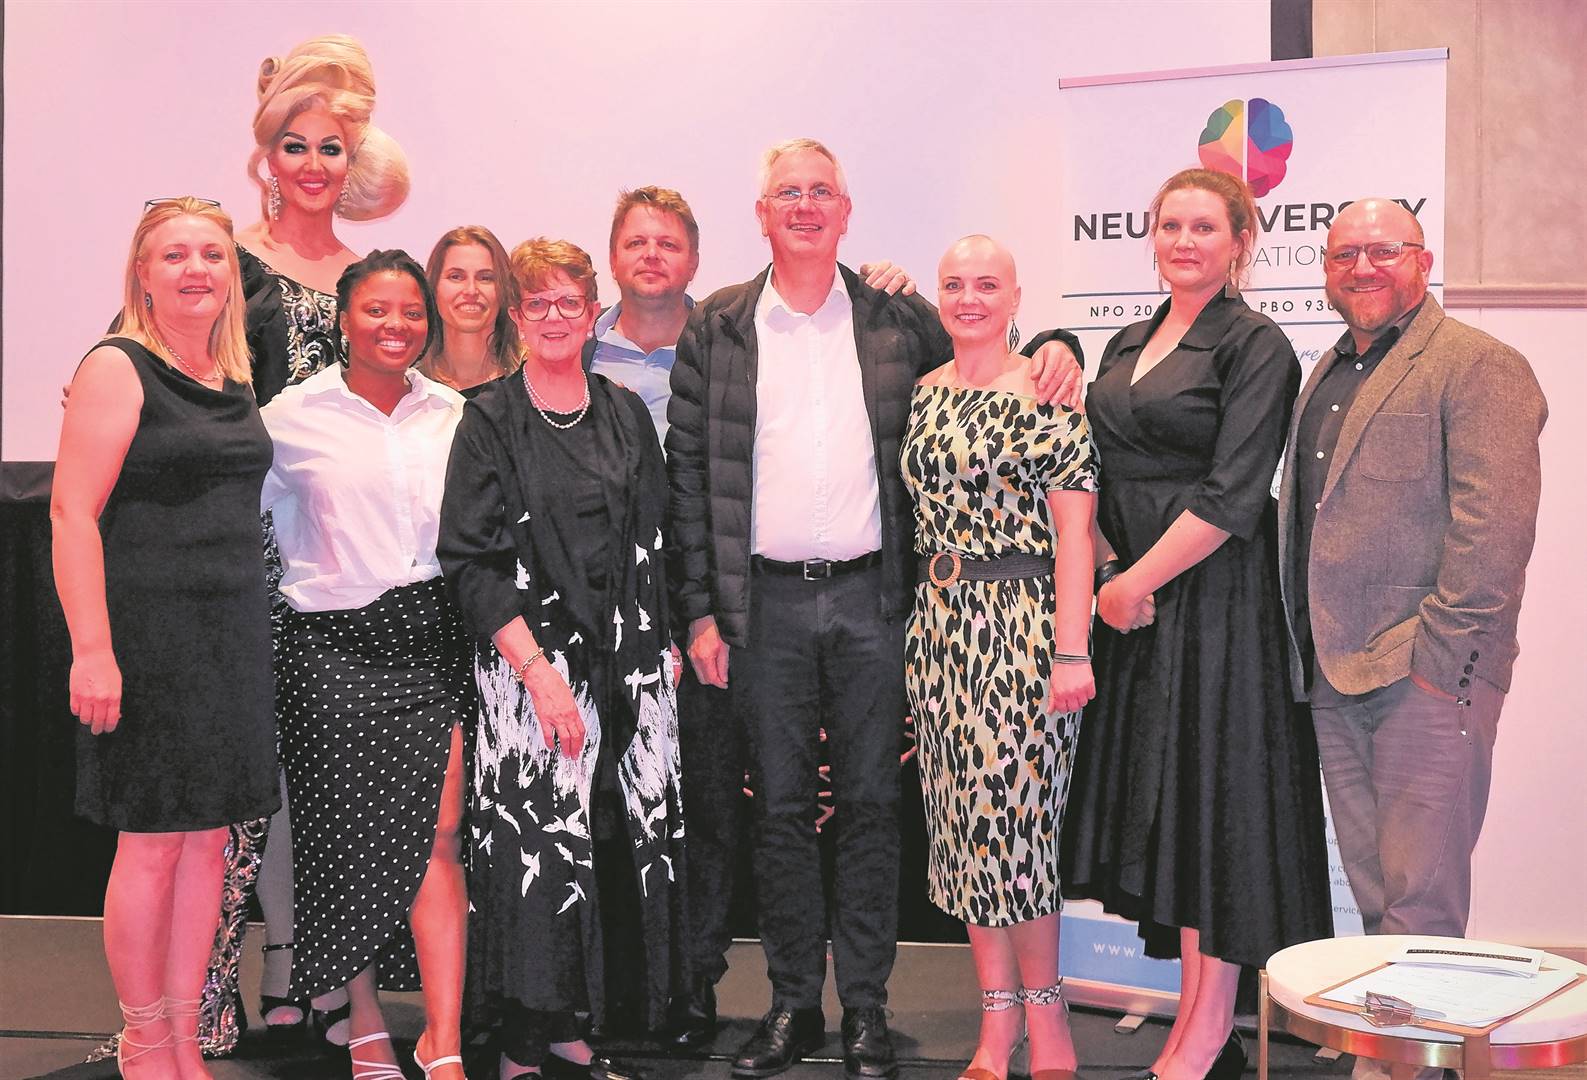 The board members of the Neurodiversity Foundation with the entertainer Cathy Specific (at back left). They are (back from left) Petra Truter and Ben Truter. In front are Noëline de Goede (director), Landisiwe Binza, Dr Adri van der Walt, Lukas Coetzee (chair), Adéle Smit (treasurer), Julie Hendricks and Flip Vorster.PHOTOs: Elria Hough/Golden String Media 